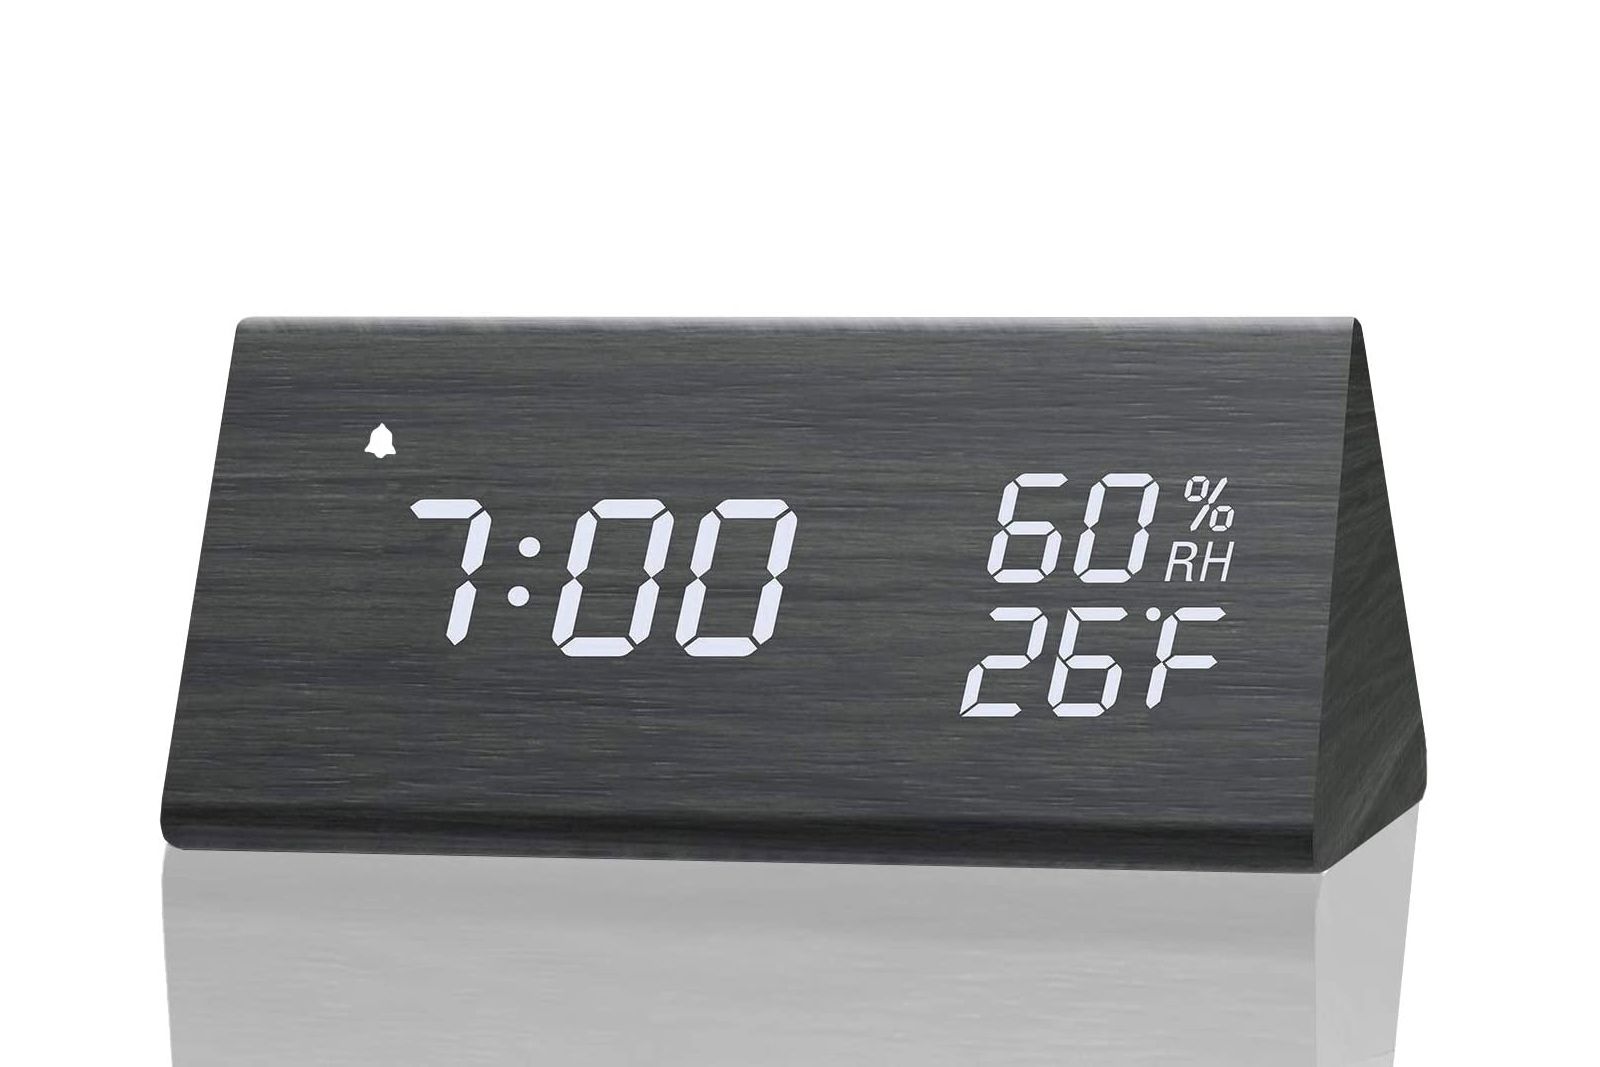 Best LED clock 2020: Get the time with a simple glance photo 2